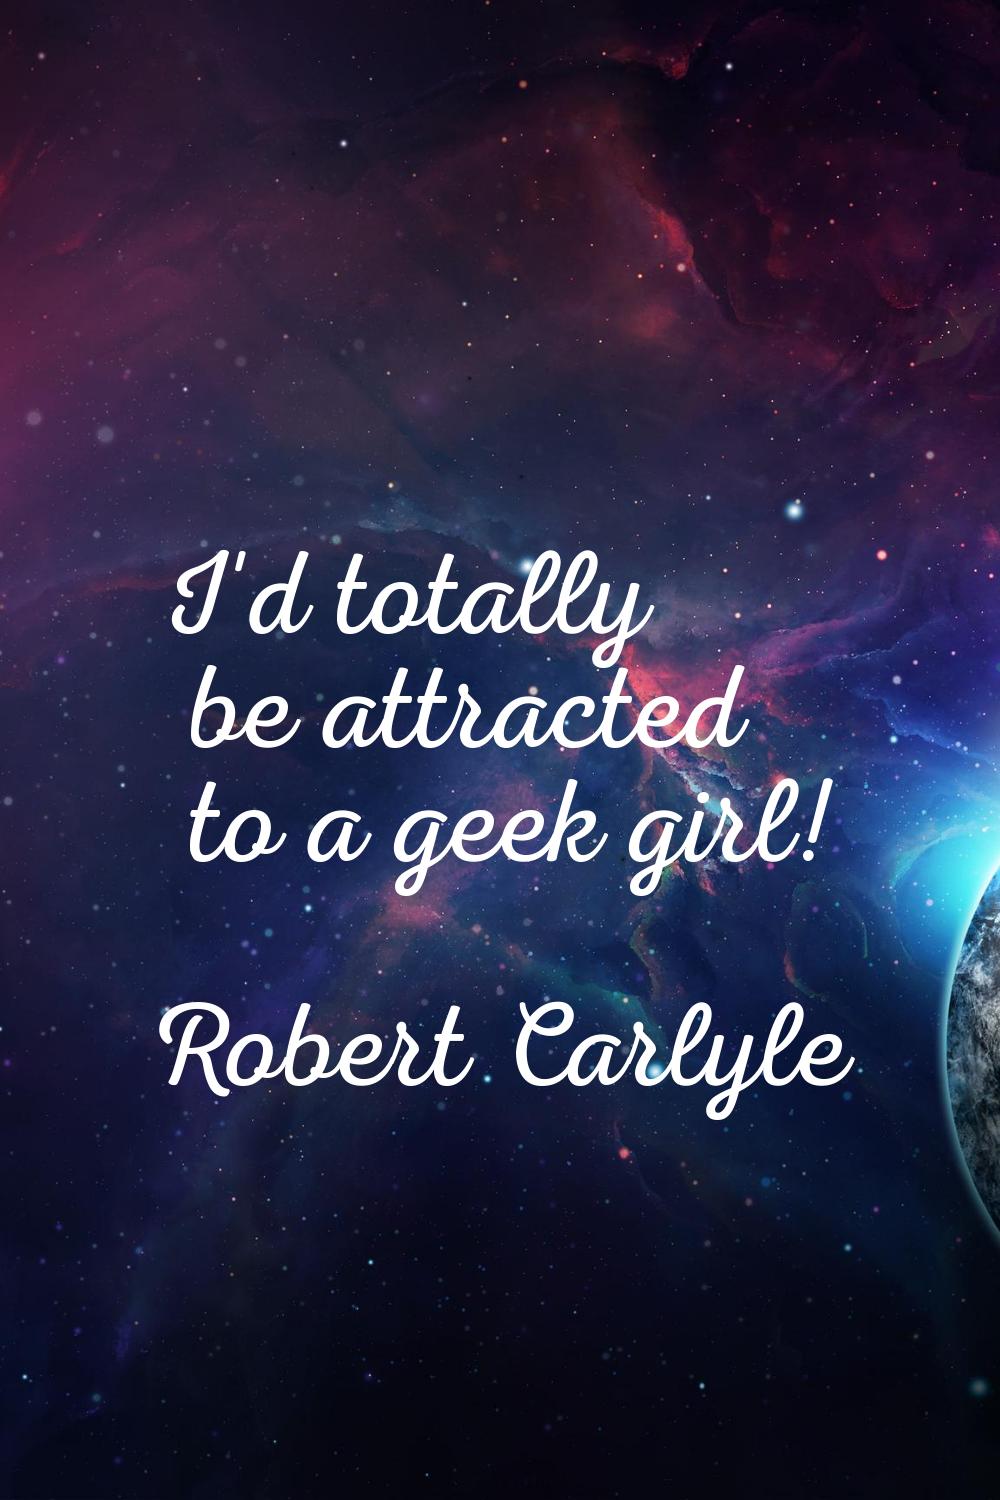 I'd totally be attracted to a geek girl!